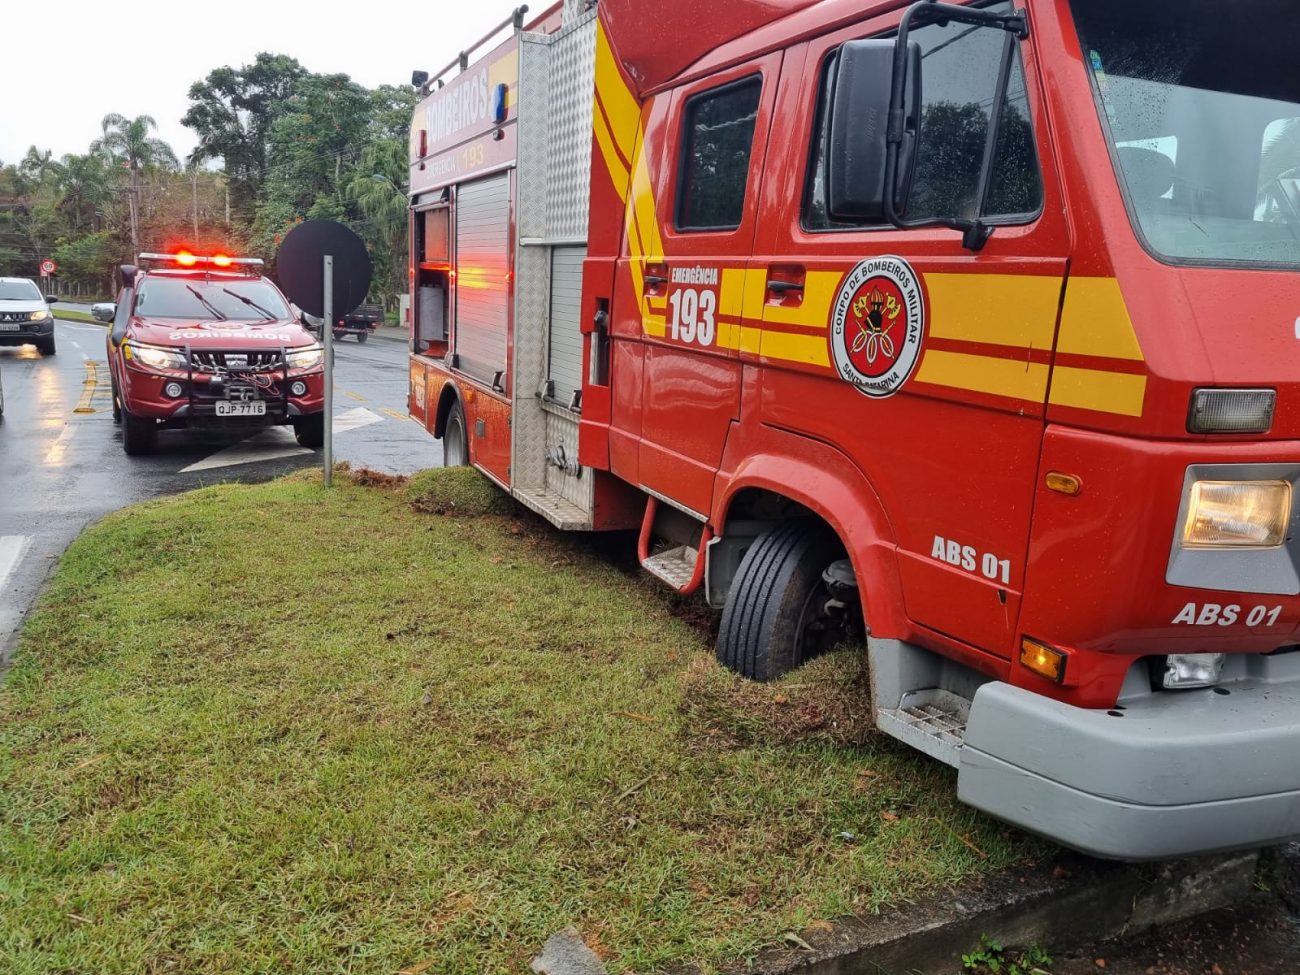 Firefighters were on their way to a fire in Rua Bahia when the accident happened - Marco Aurelio Junior/NDTV